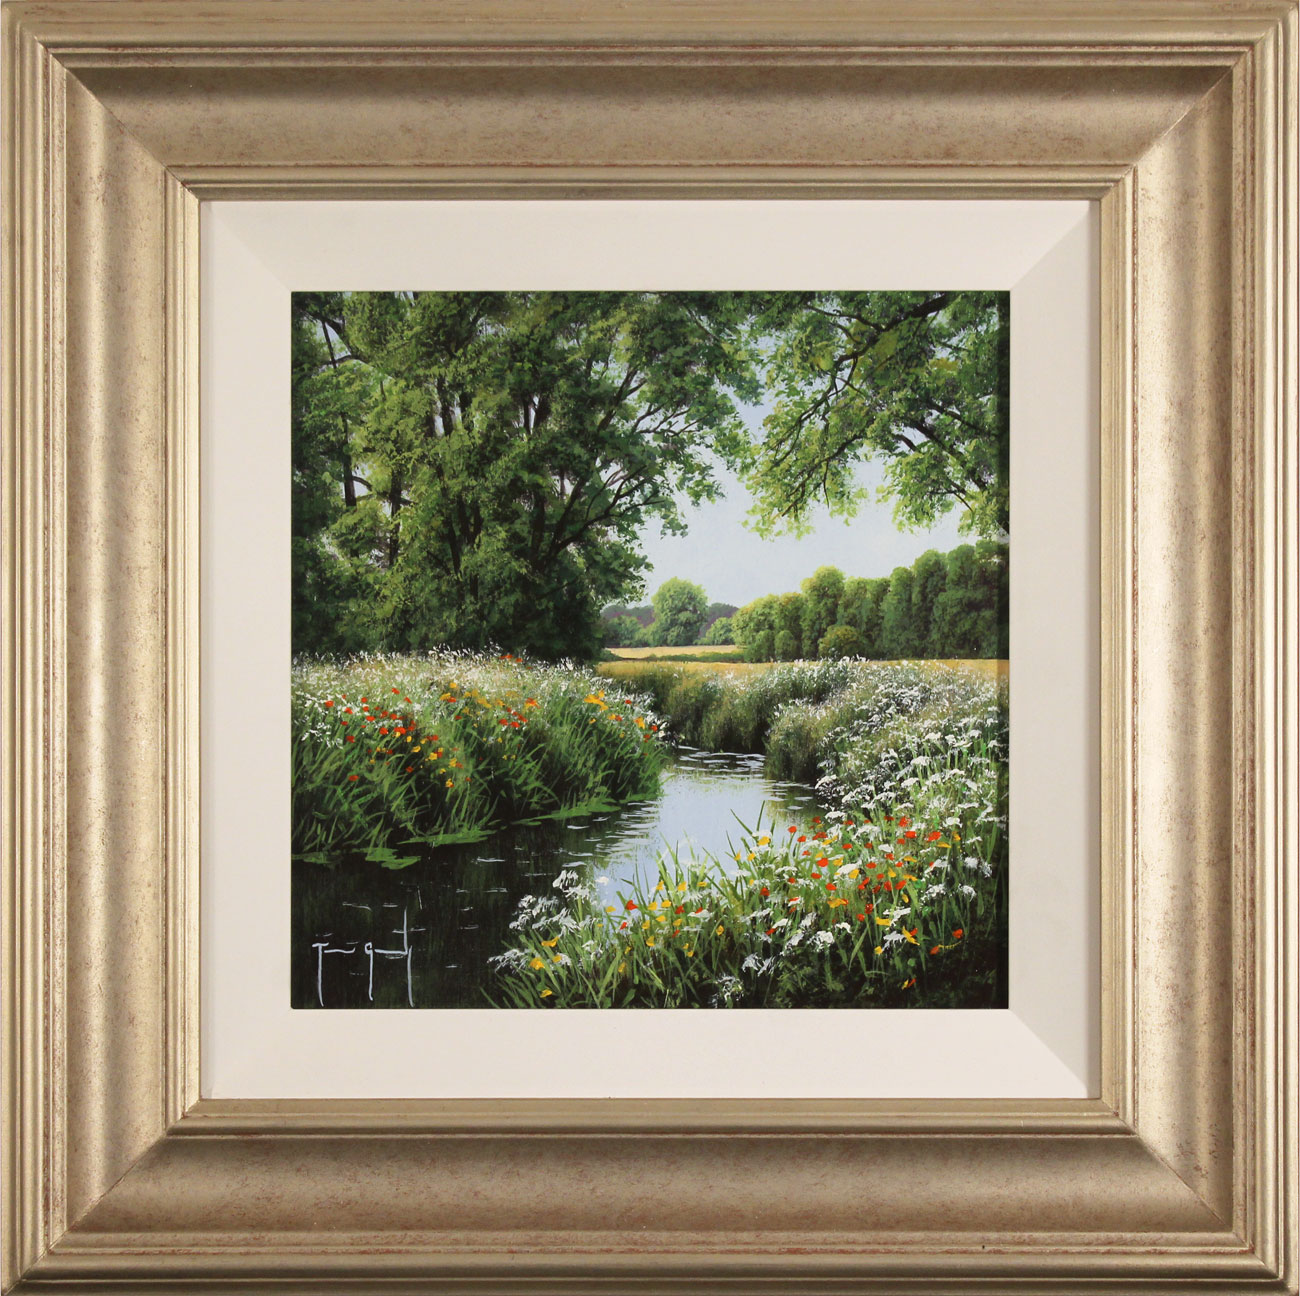 Terry Grundy, Original oil painting on panel, High Summer